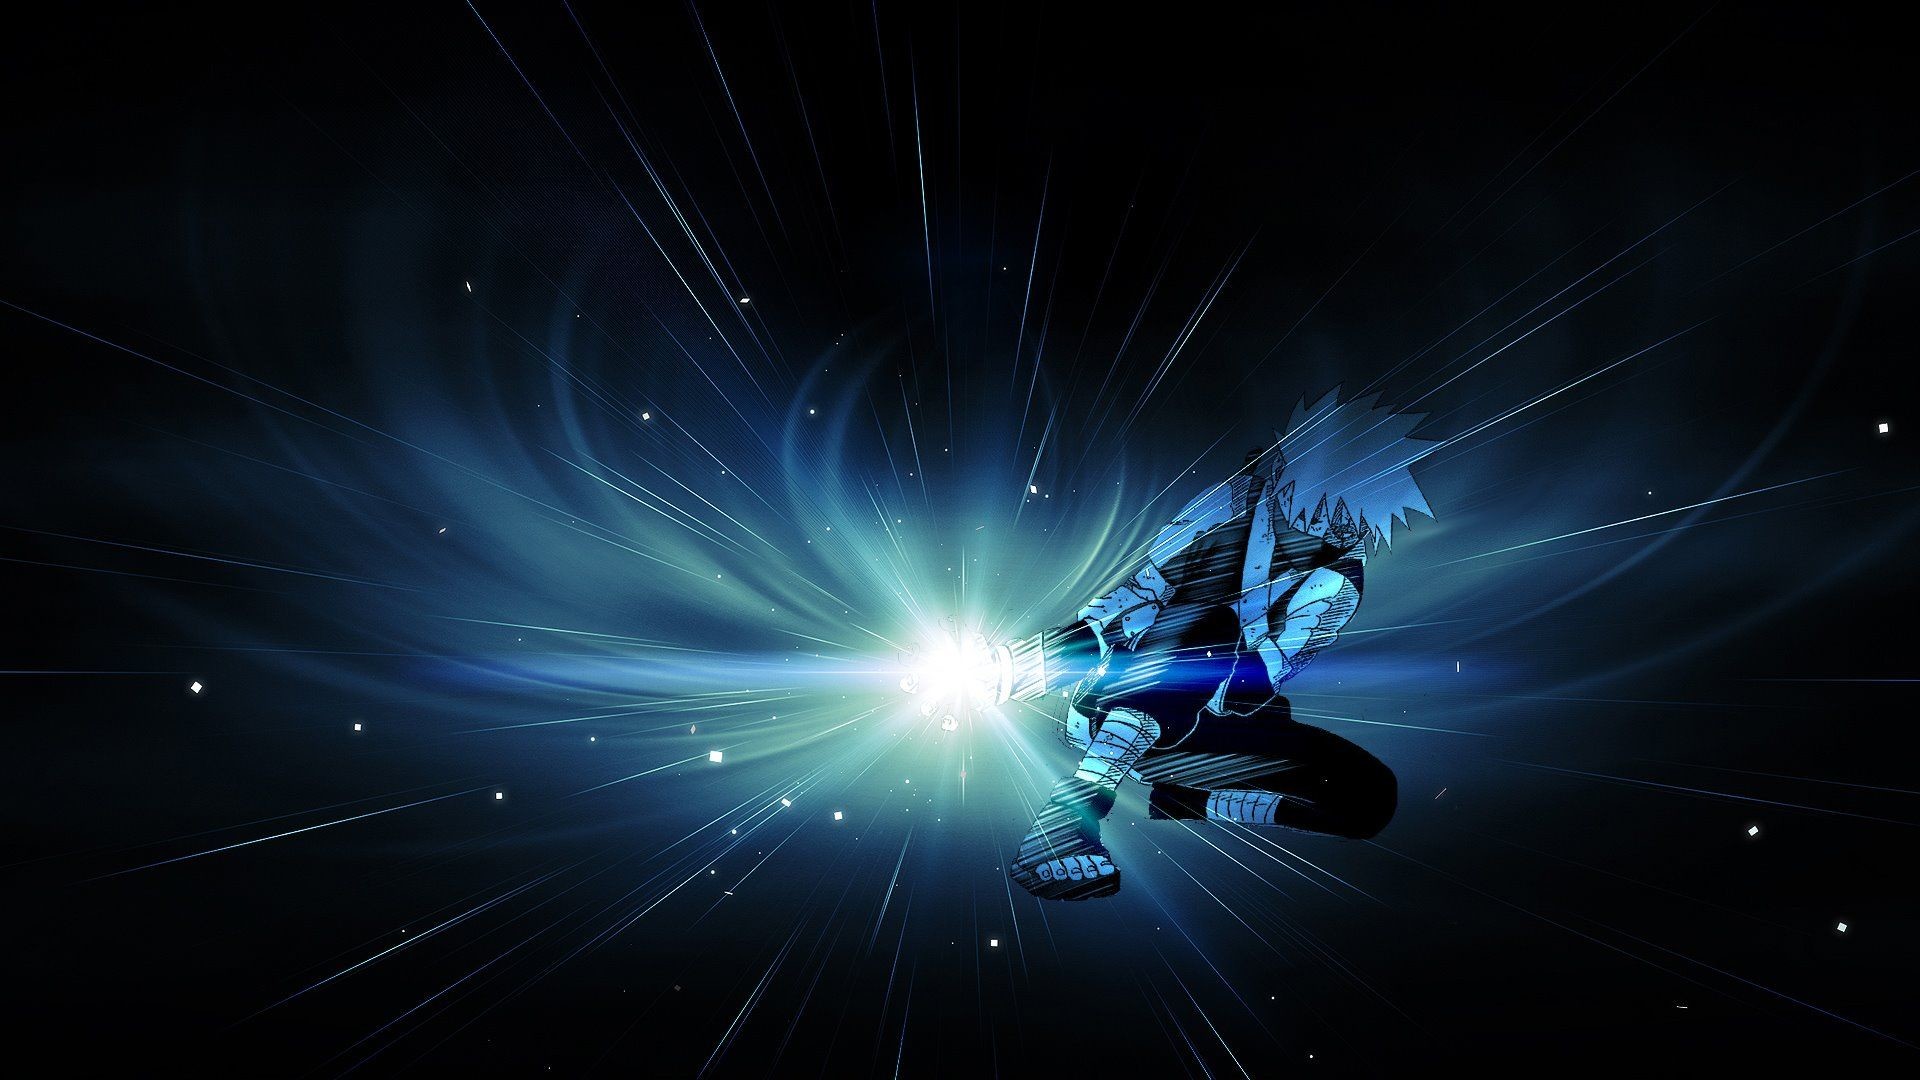 1920x1080 Kakashi HD Wallpapers HD Wallpapers, Backgrounds, Images, Art ..